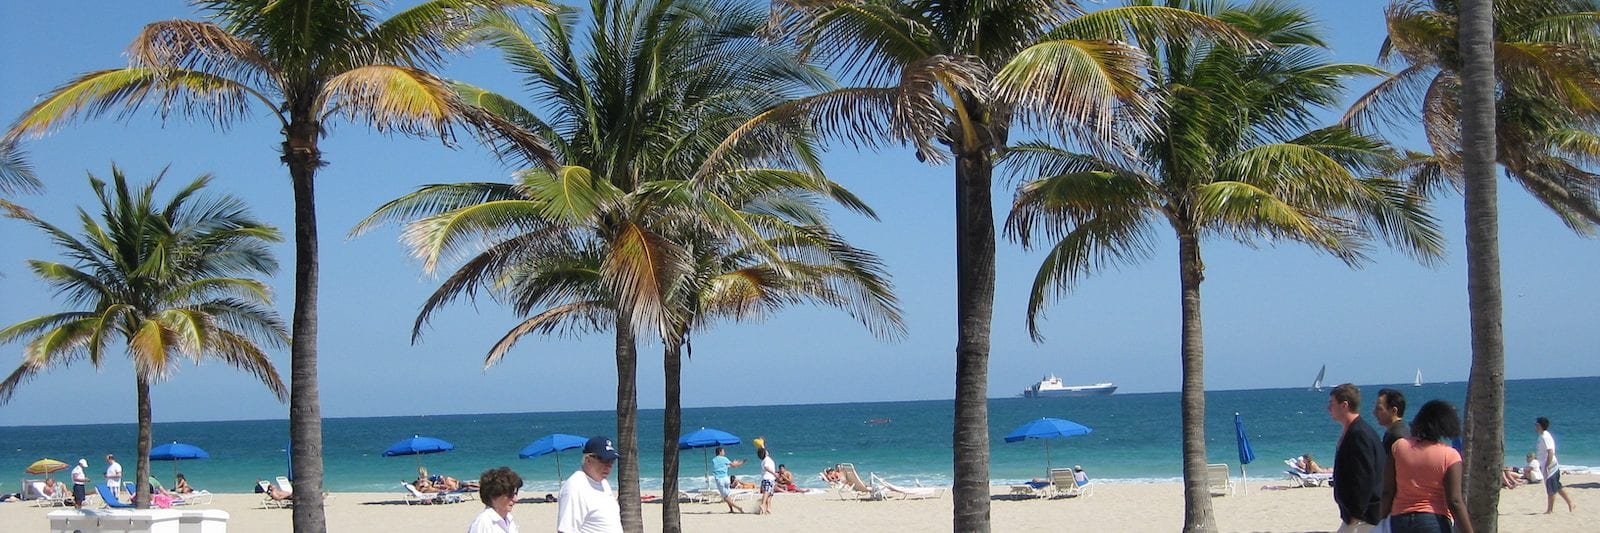 South Beach in Fort Lauderdale, Florida